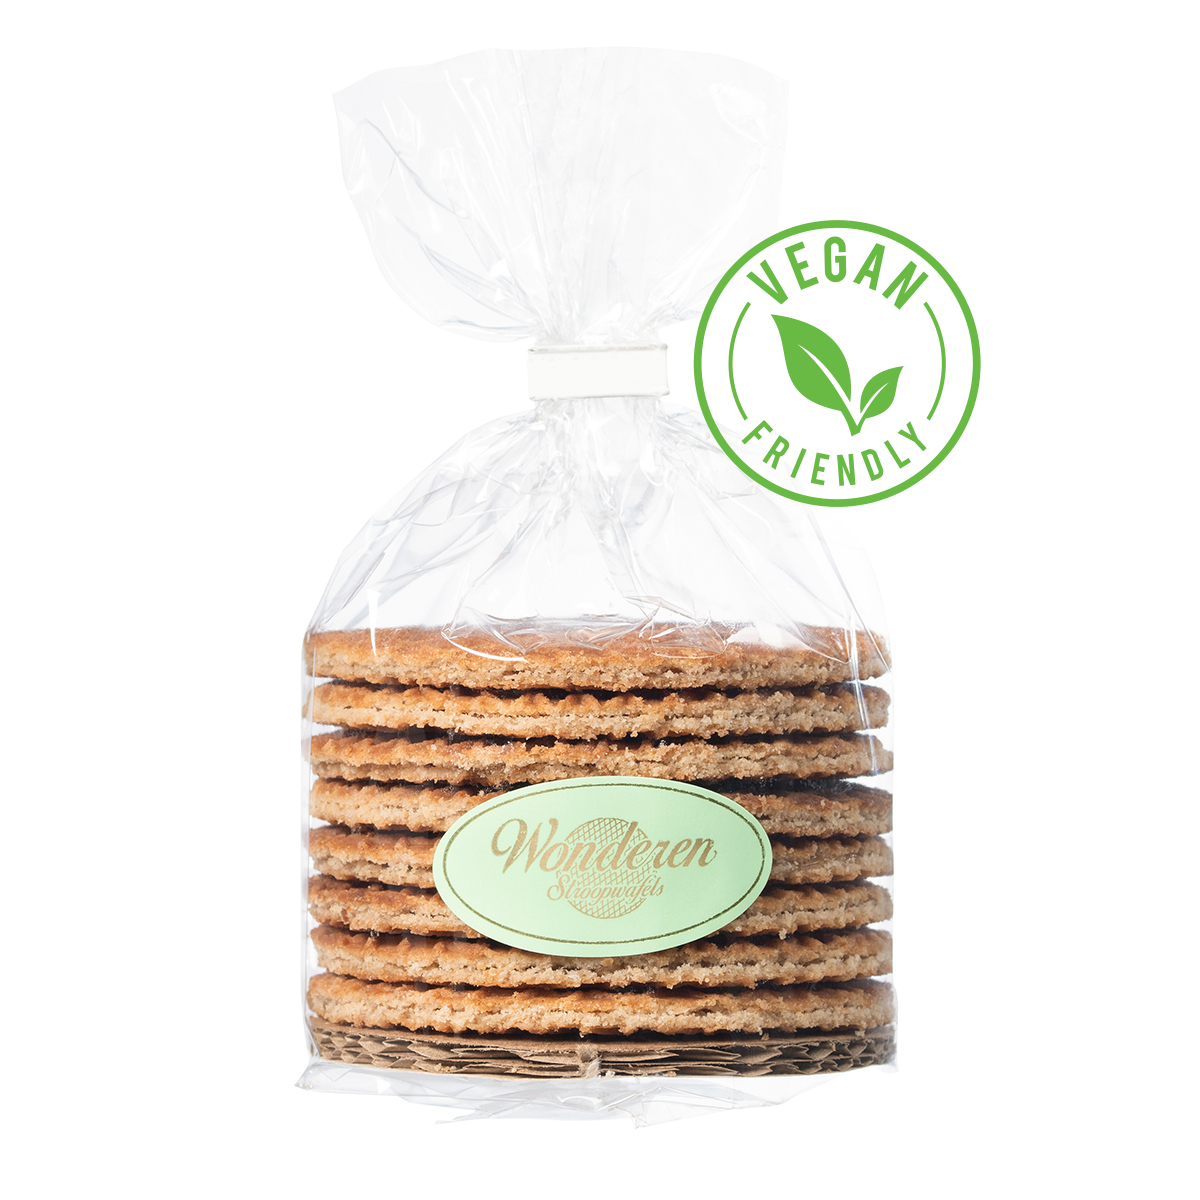 A stack of Wonderen Stroopwafels in a bag with a label on it.